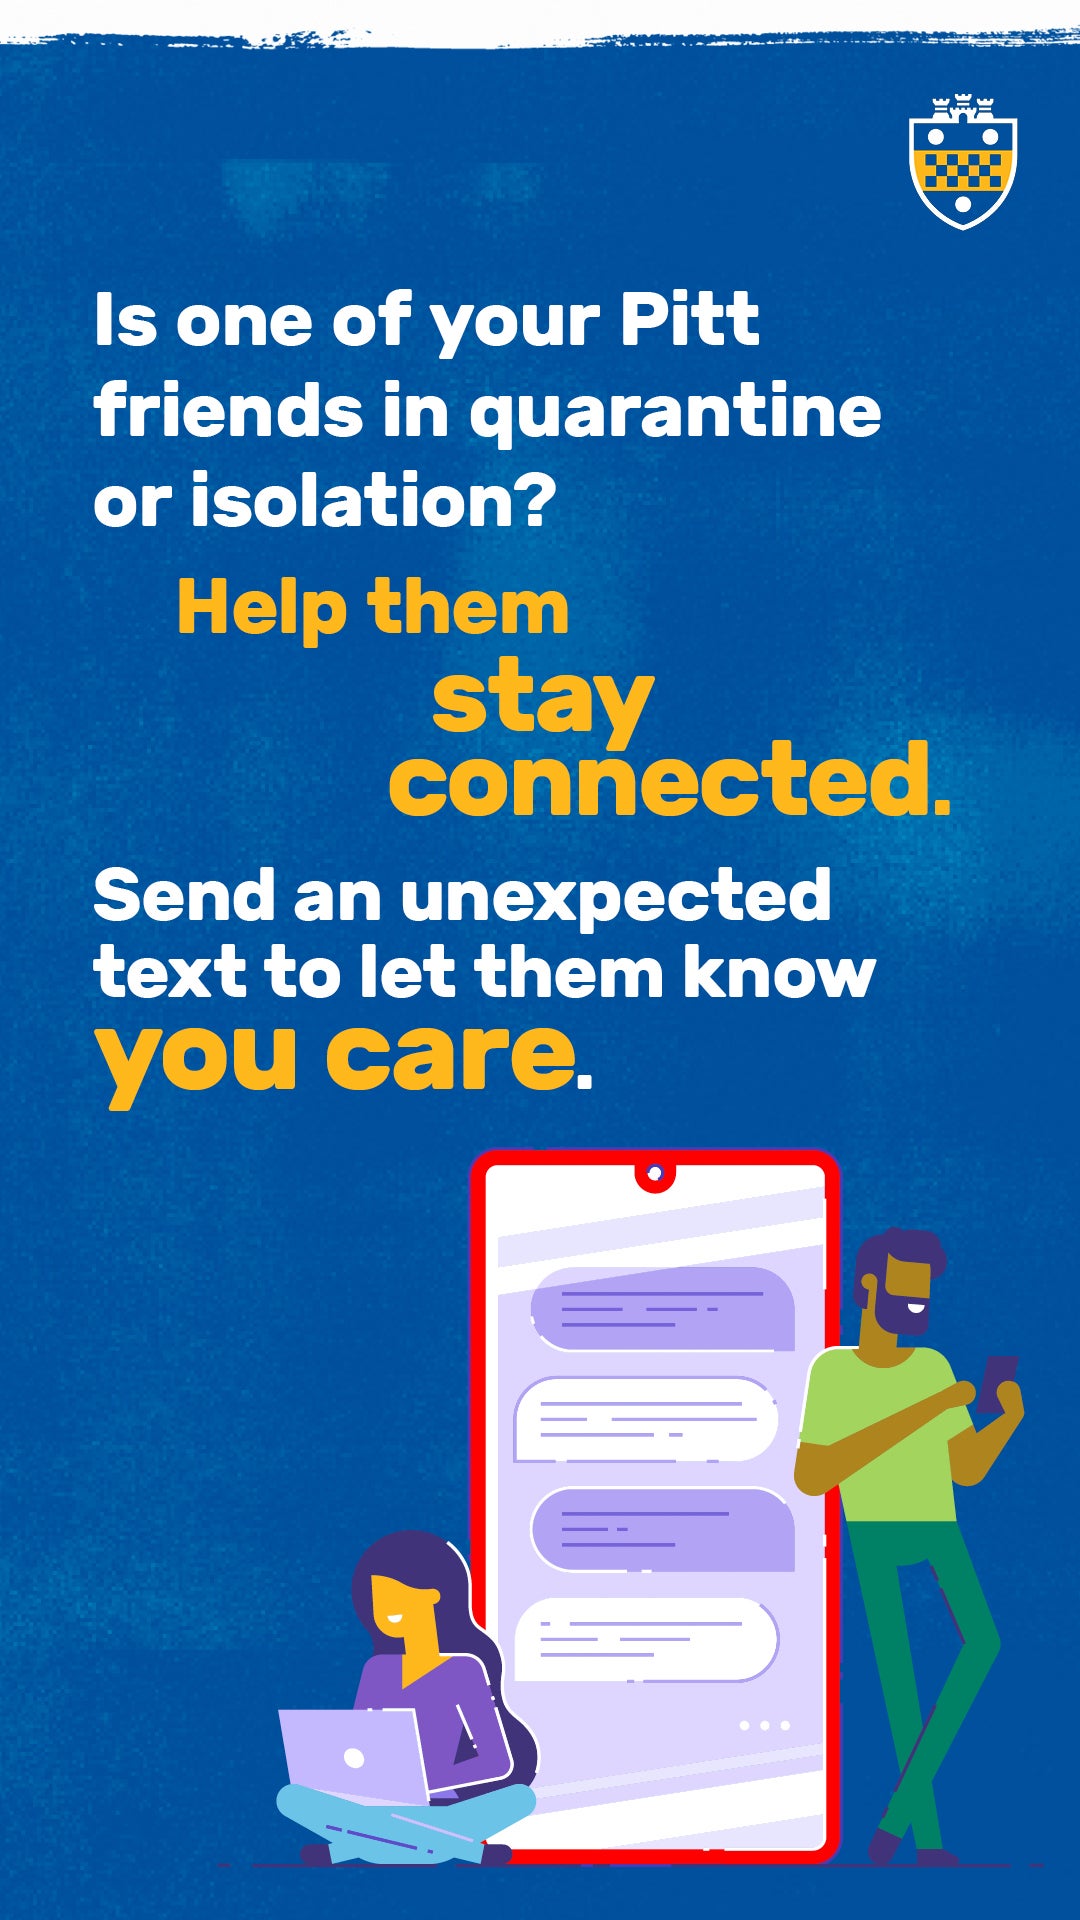 a blue, white and gold graphic that says "Is one of your Pitt friends in quarantine or isolation? Help them stay connected. Send an updated text to let them know you care."